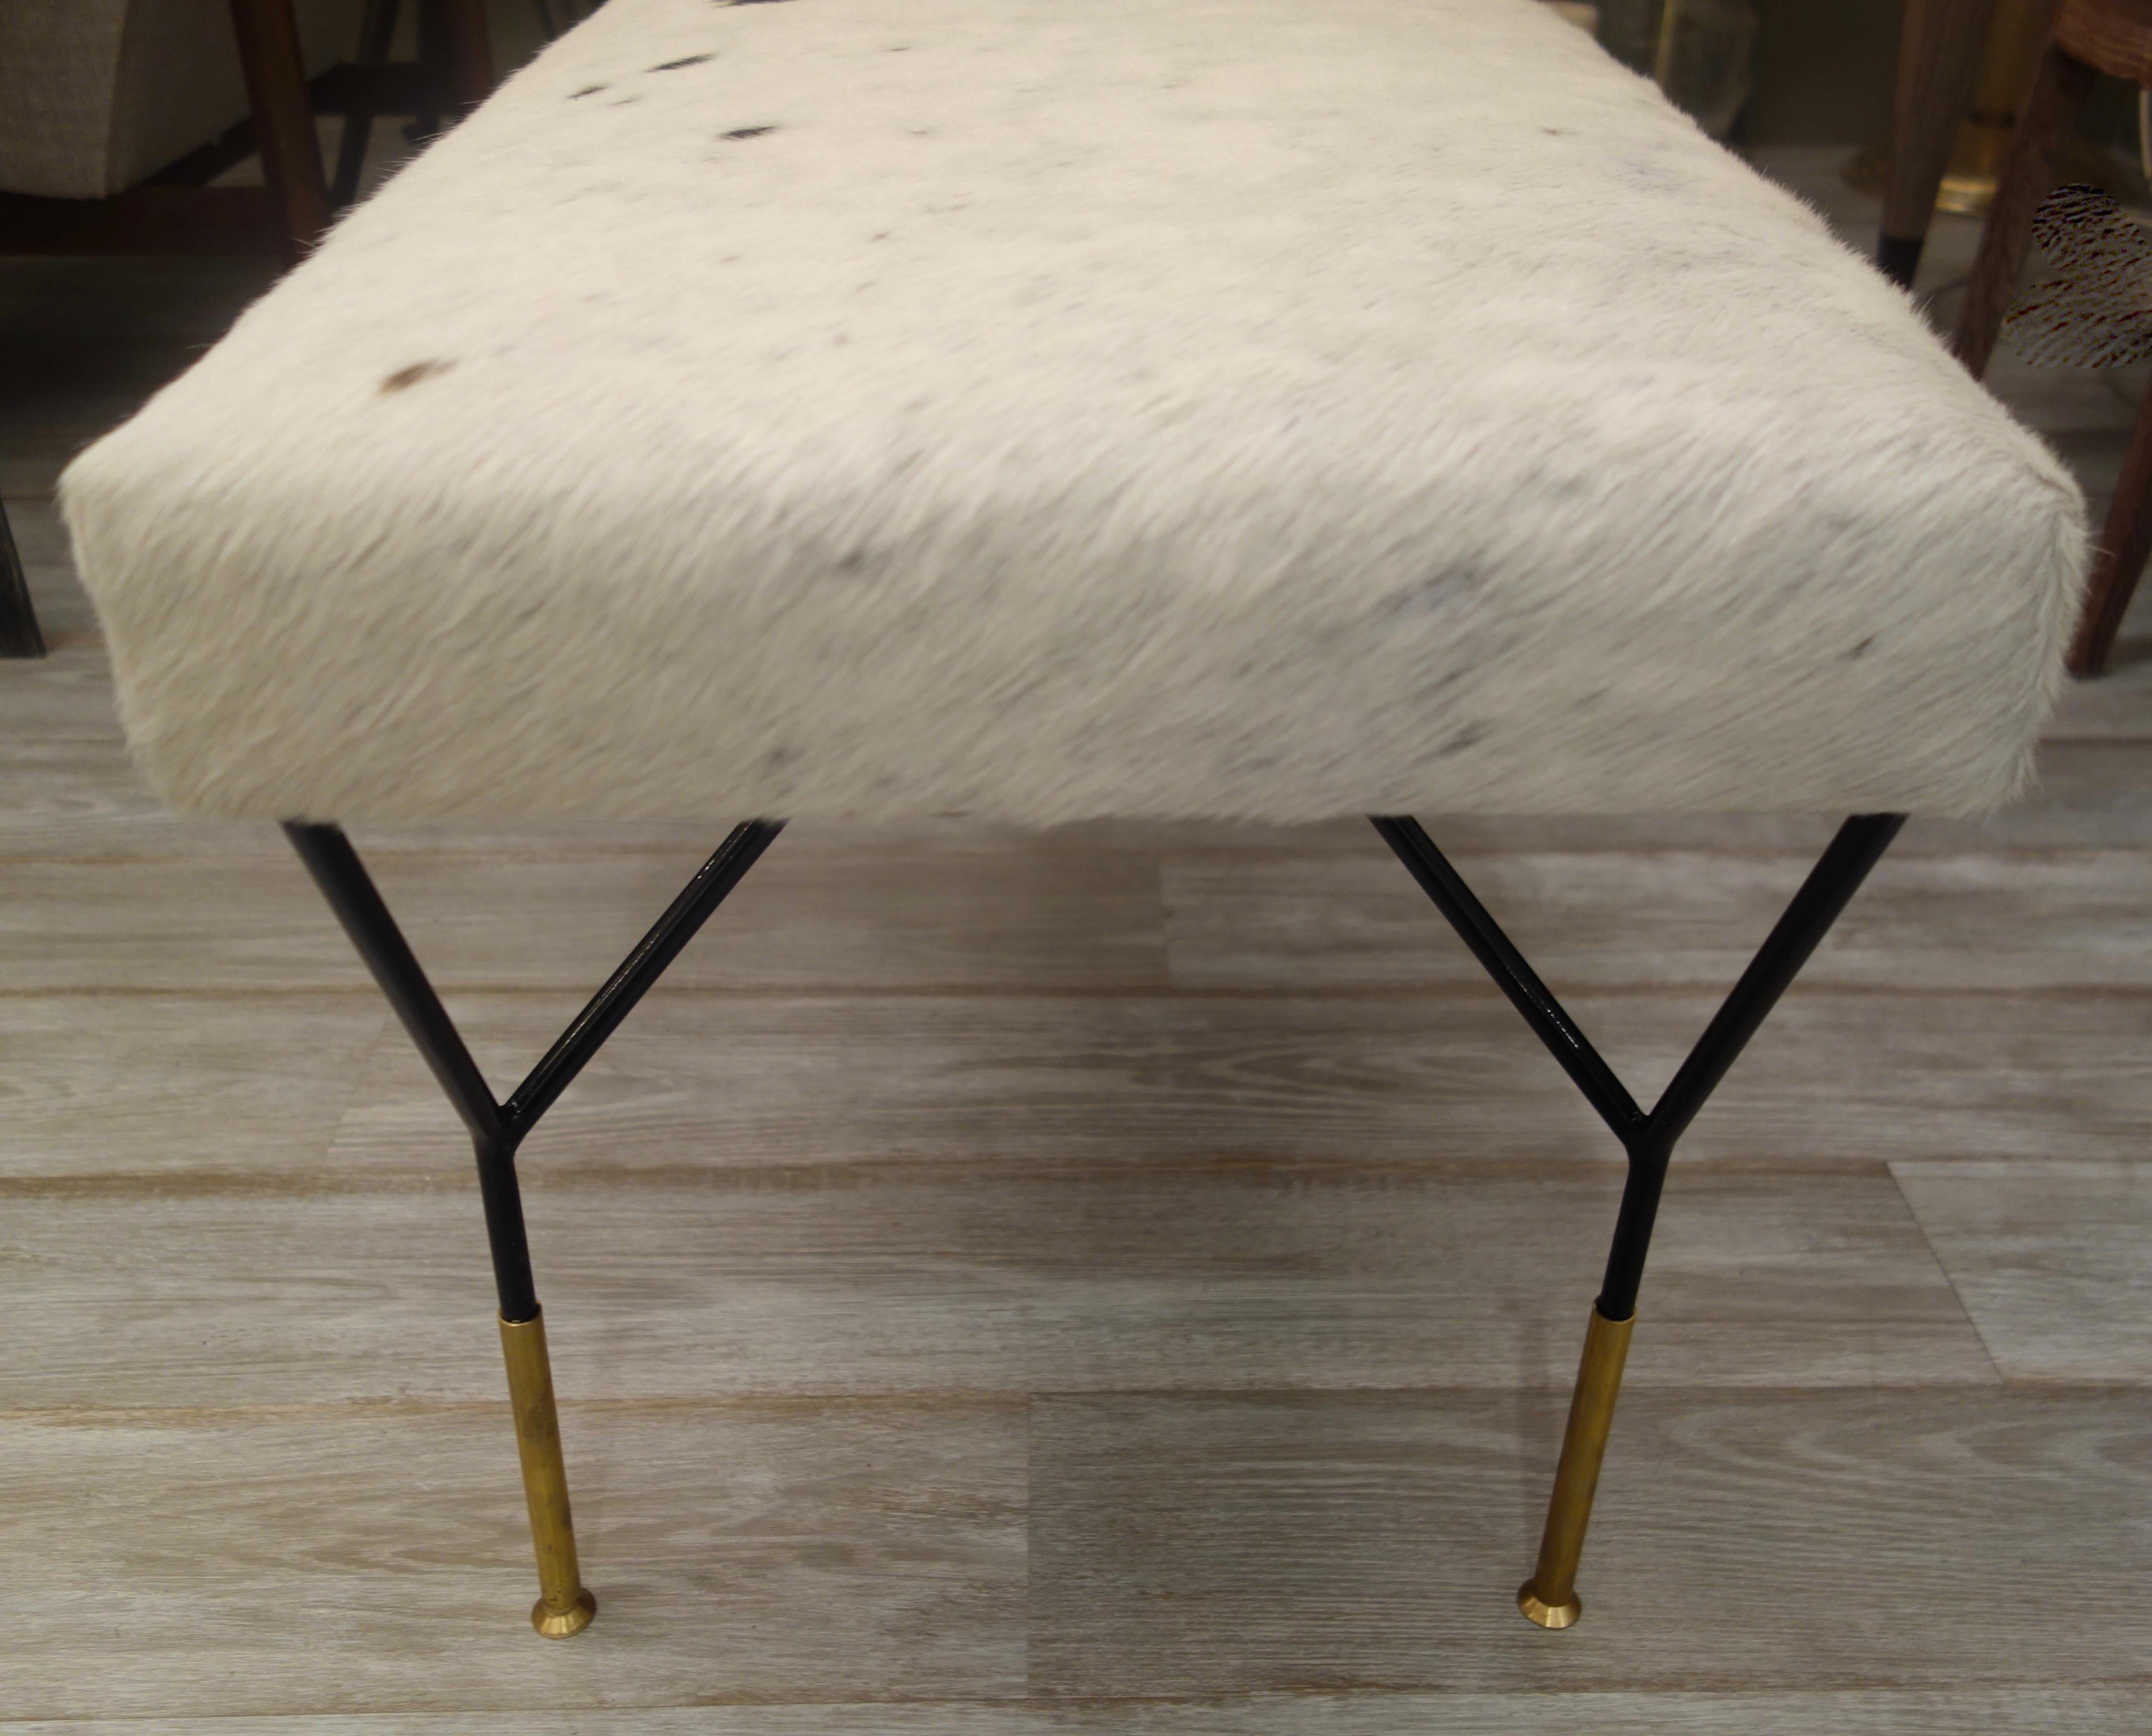 An Italian midcentury style bench, the top upholstered in white and black new cowhide, resting on black metal legs each attached at two points from the underside of the seat forming a triangle ending in a single, elongated brass foot.